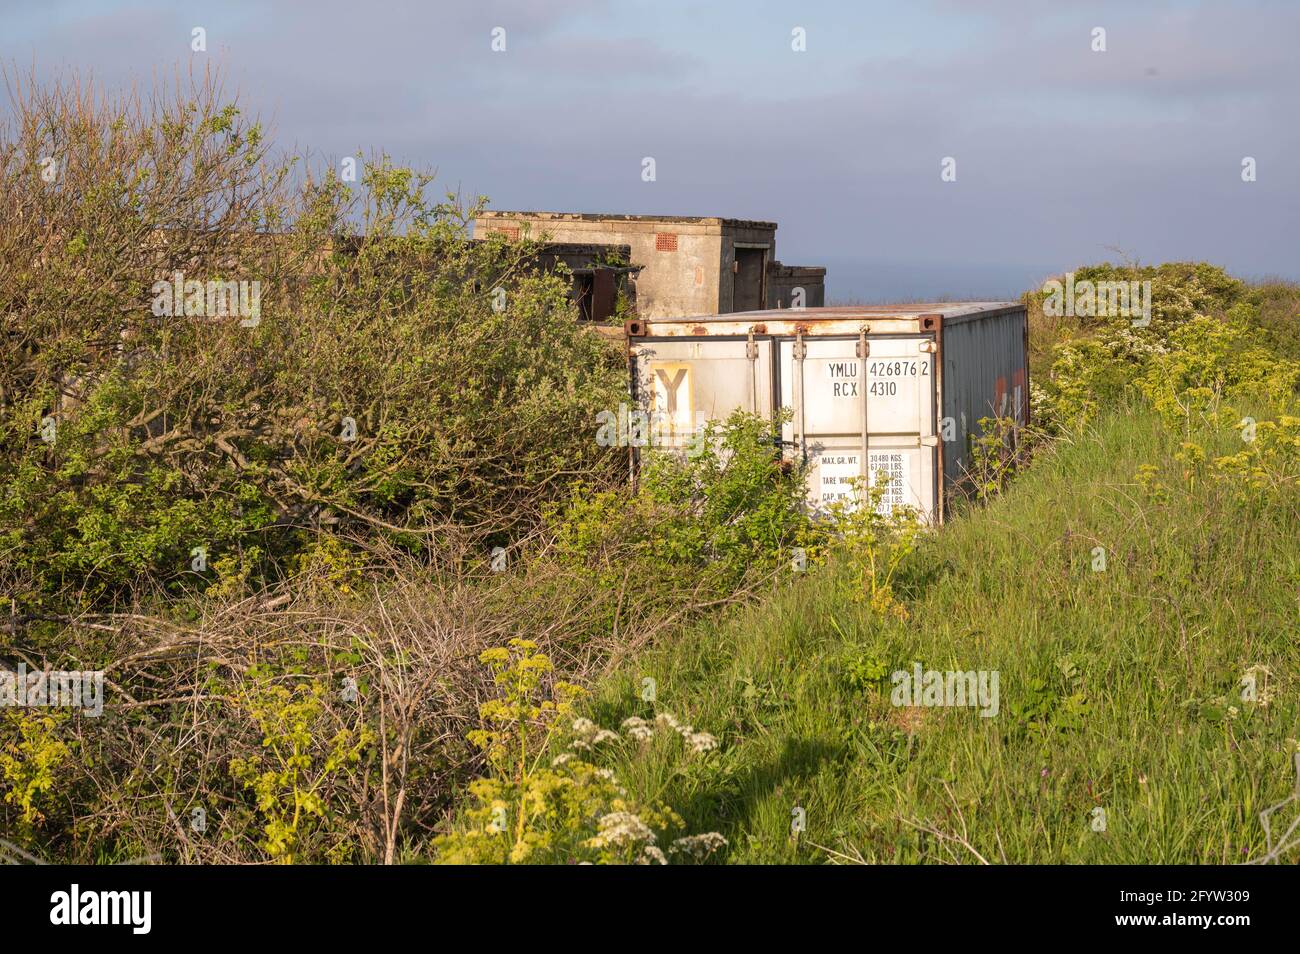 A lorry metal shipping  box container  sitting in an overgrown field next to a concrete  building Stock Photo